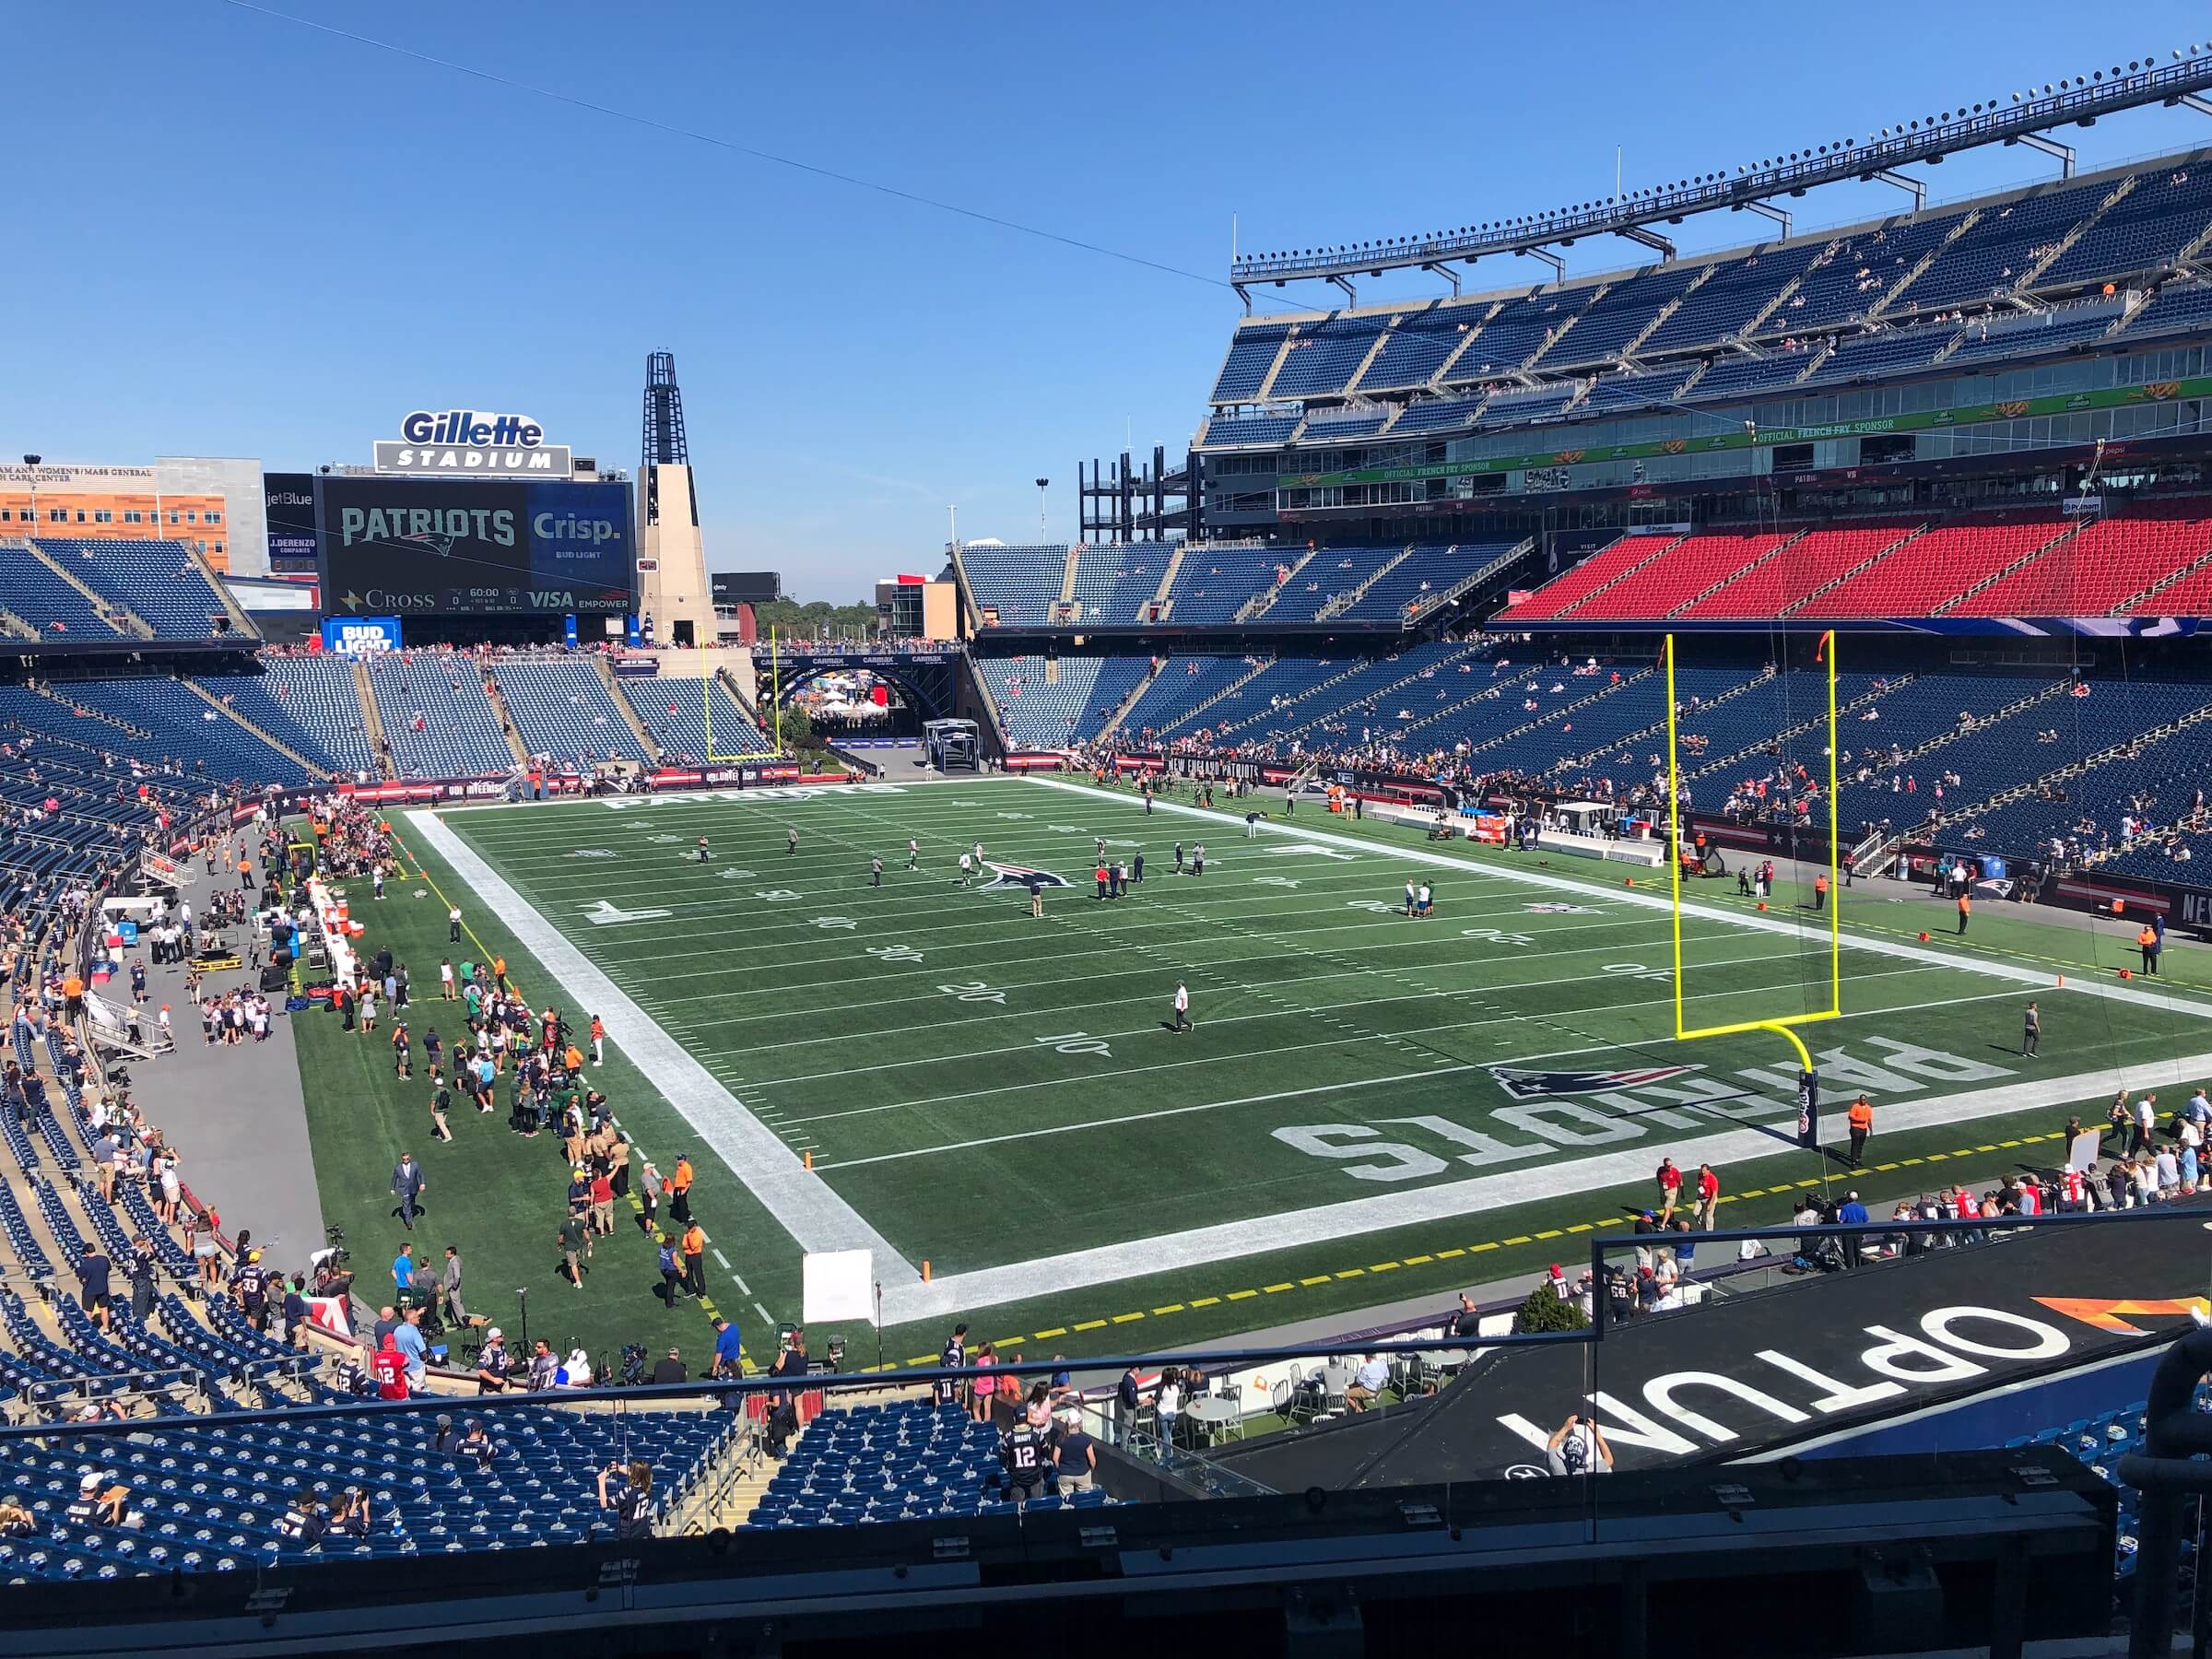 Step Inside: Gillette Stadium - Home of the New England Patriots